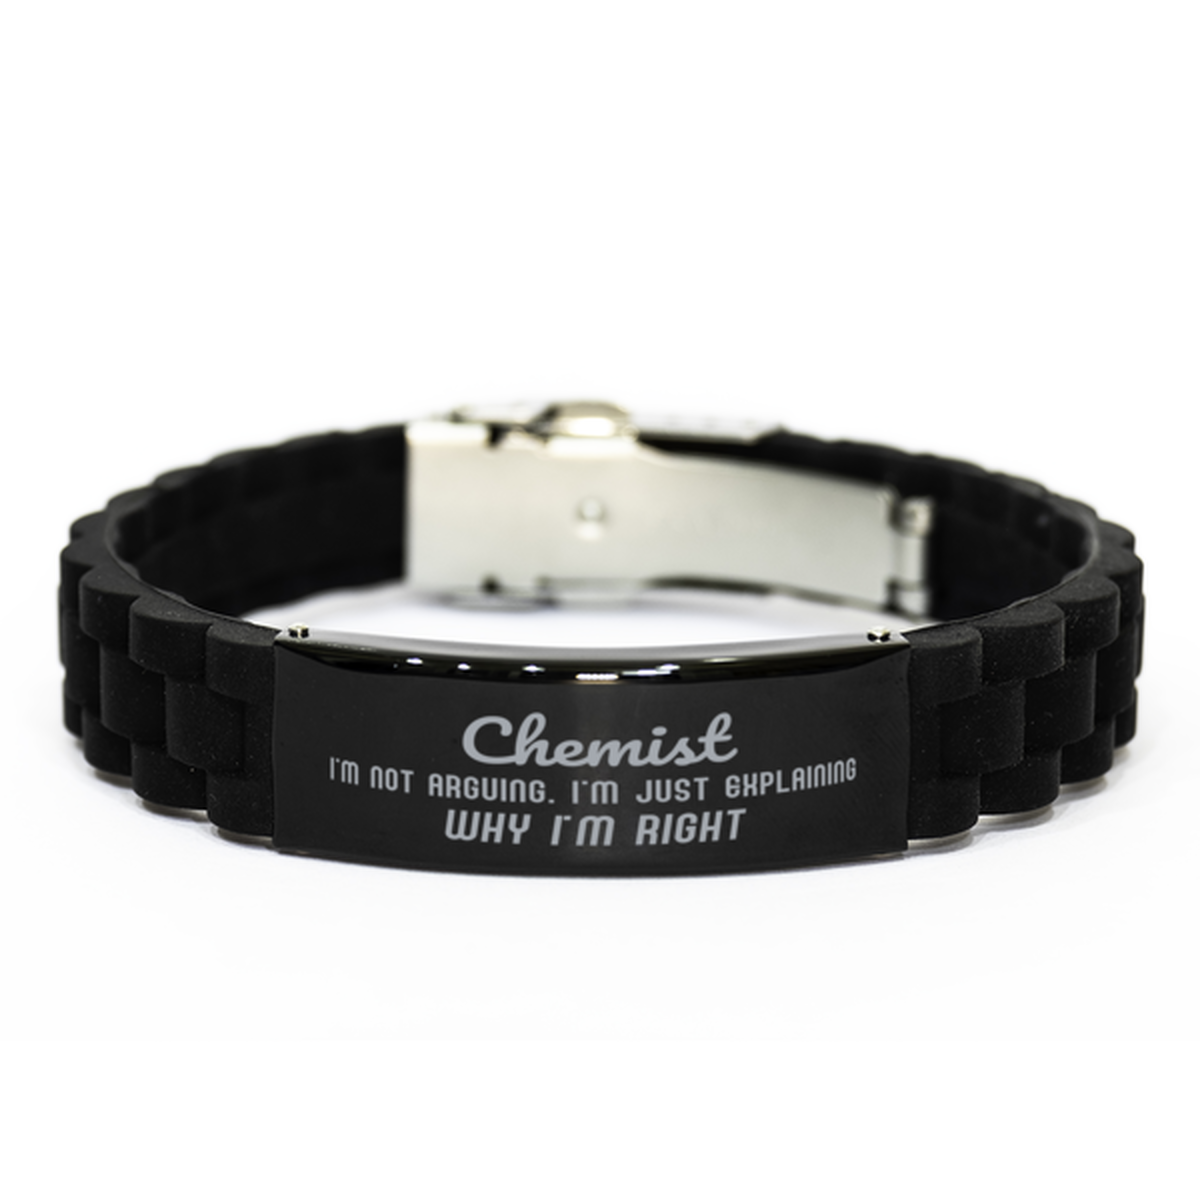 Chemist I'm not Arguing. I'm Just Explaining Why I'm RIGHT Black Glidelock Clasp Bracelet, Funny Saying Quote Chemist Gifts For Chemist Graduation Birthday Christmas Gifts for Men Women Coworker